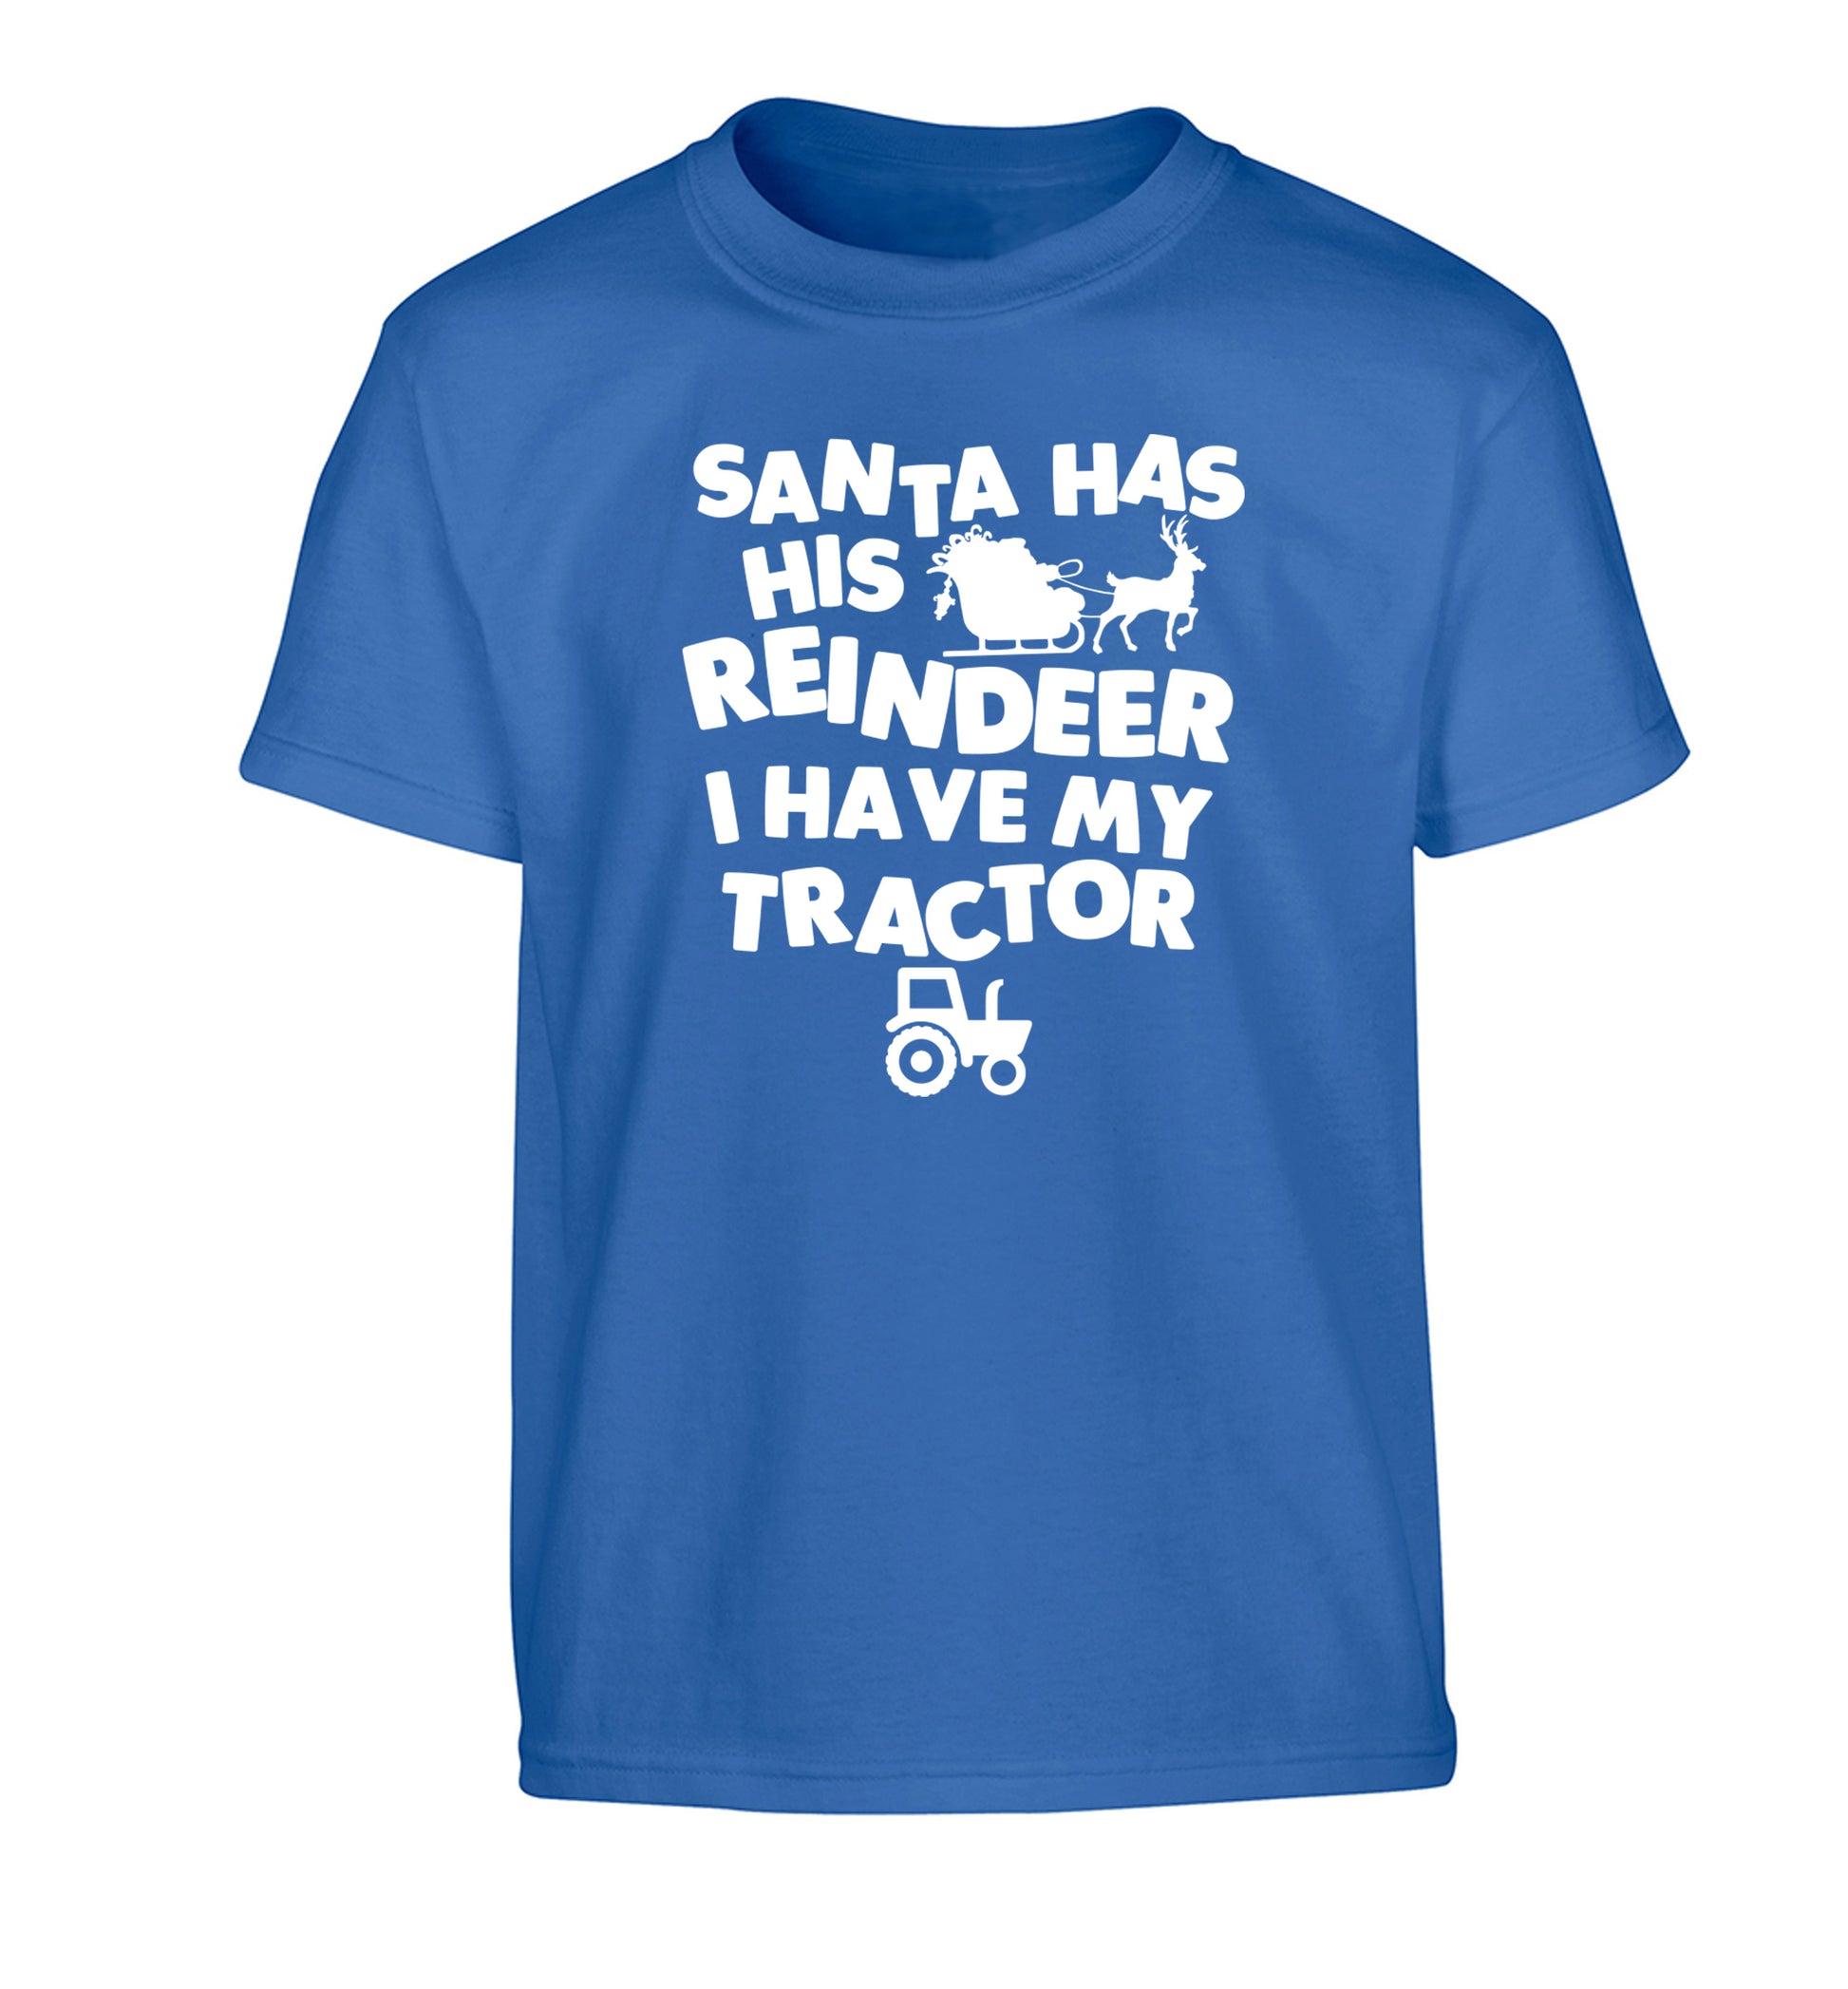 Santa has his reindeer I have my tractor Children's blue Tshirt 12-14 Years